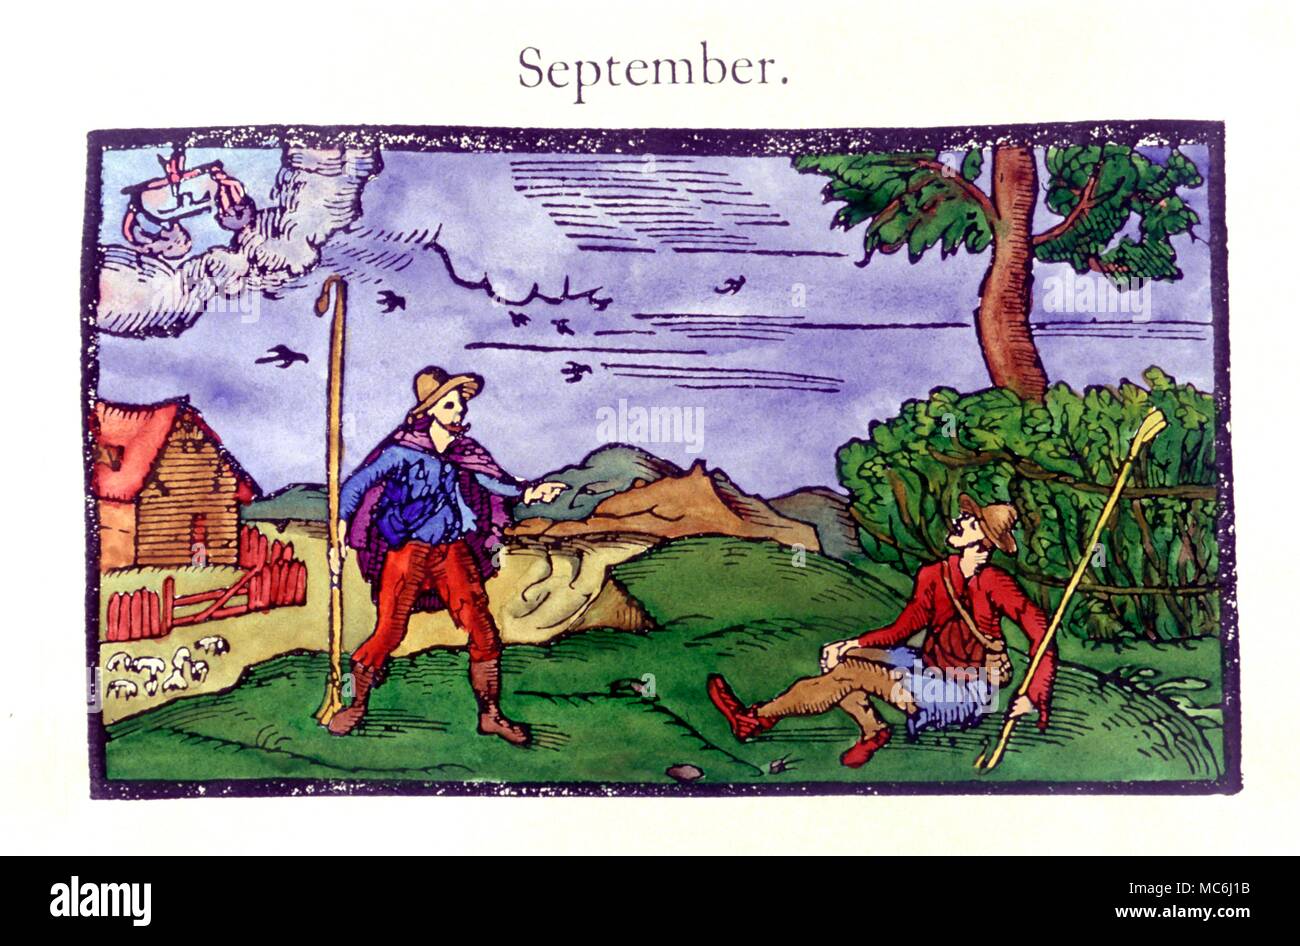 Zodiac Signs Libra Libra and Scales the month of September From a series of months used as vignettes in Eddmund Spenser's The Fairie Queene derived from his Shepheard Calendar of 1579 Stock Photo